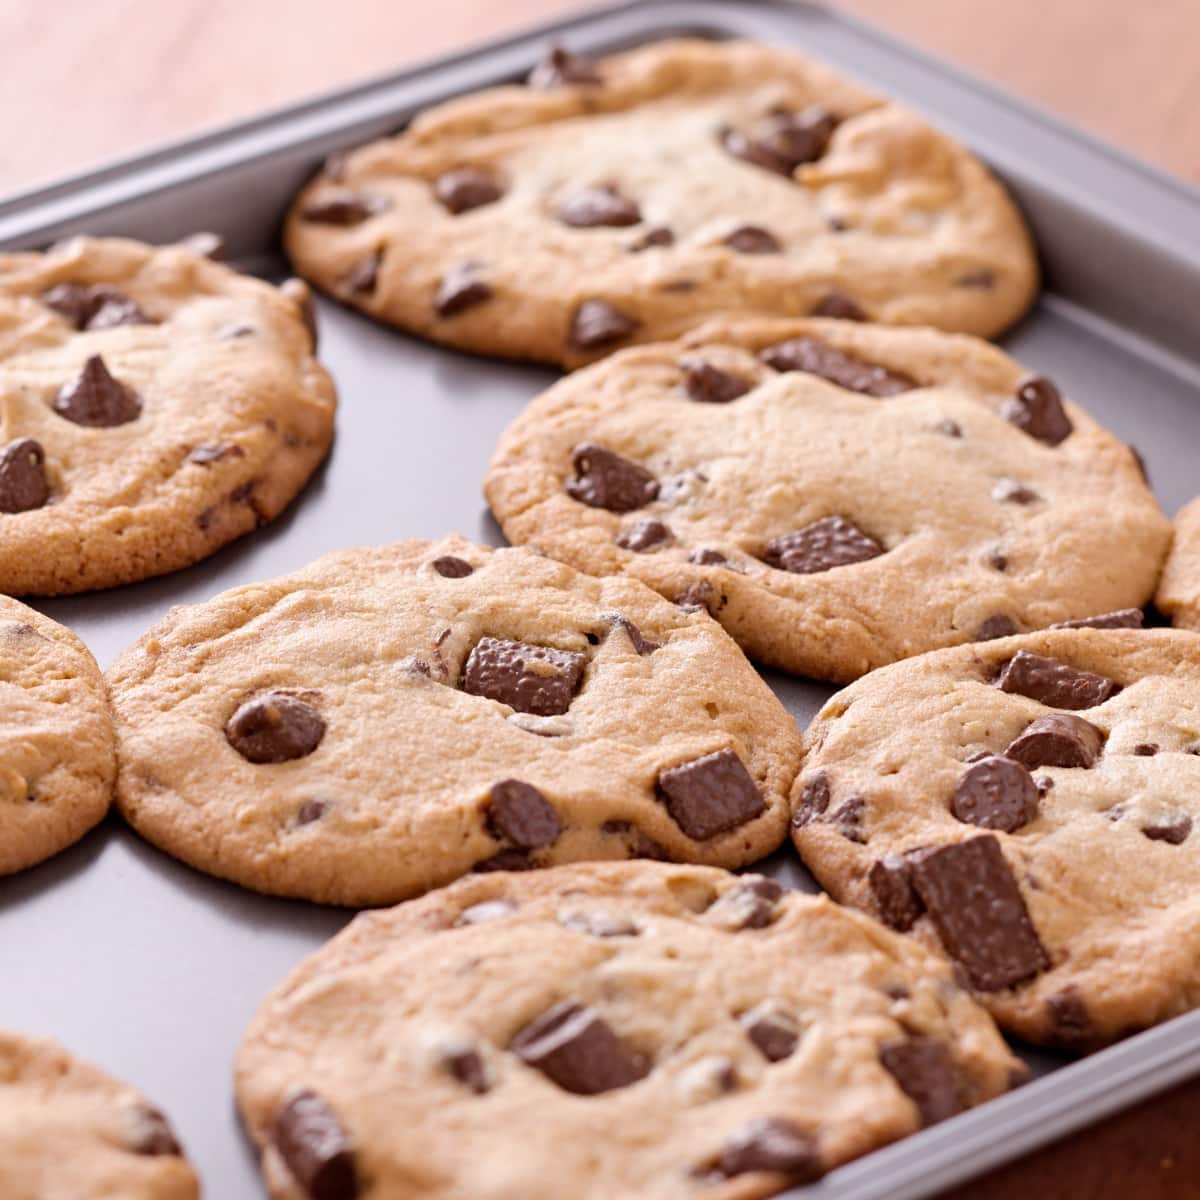 https://insanelygoodrecipes.com/wp-content/uploads/2023/07/Cookies-in-Cookie-Sheets.jpg